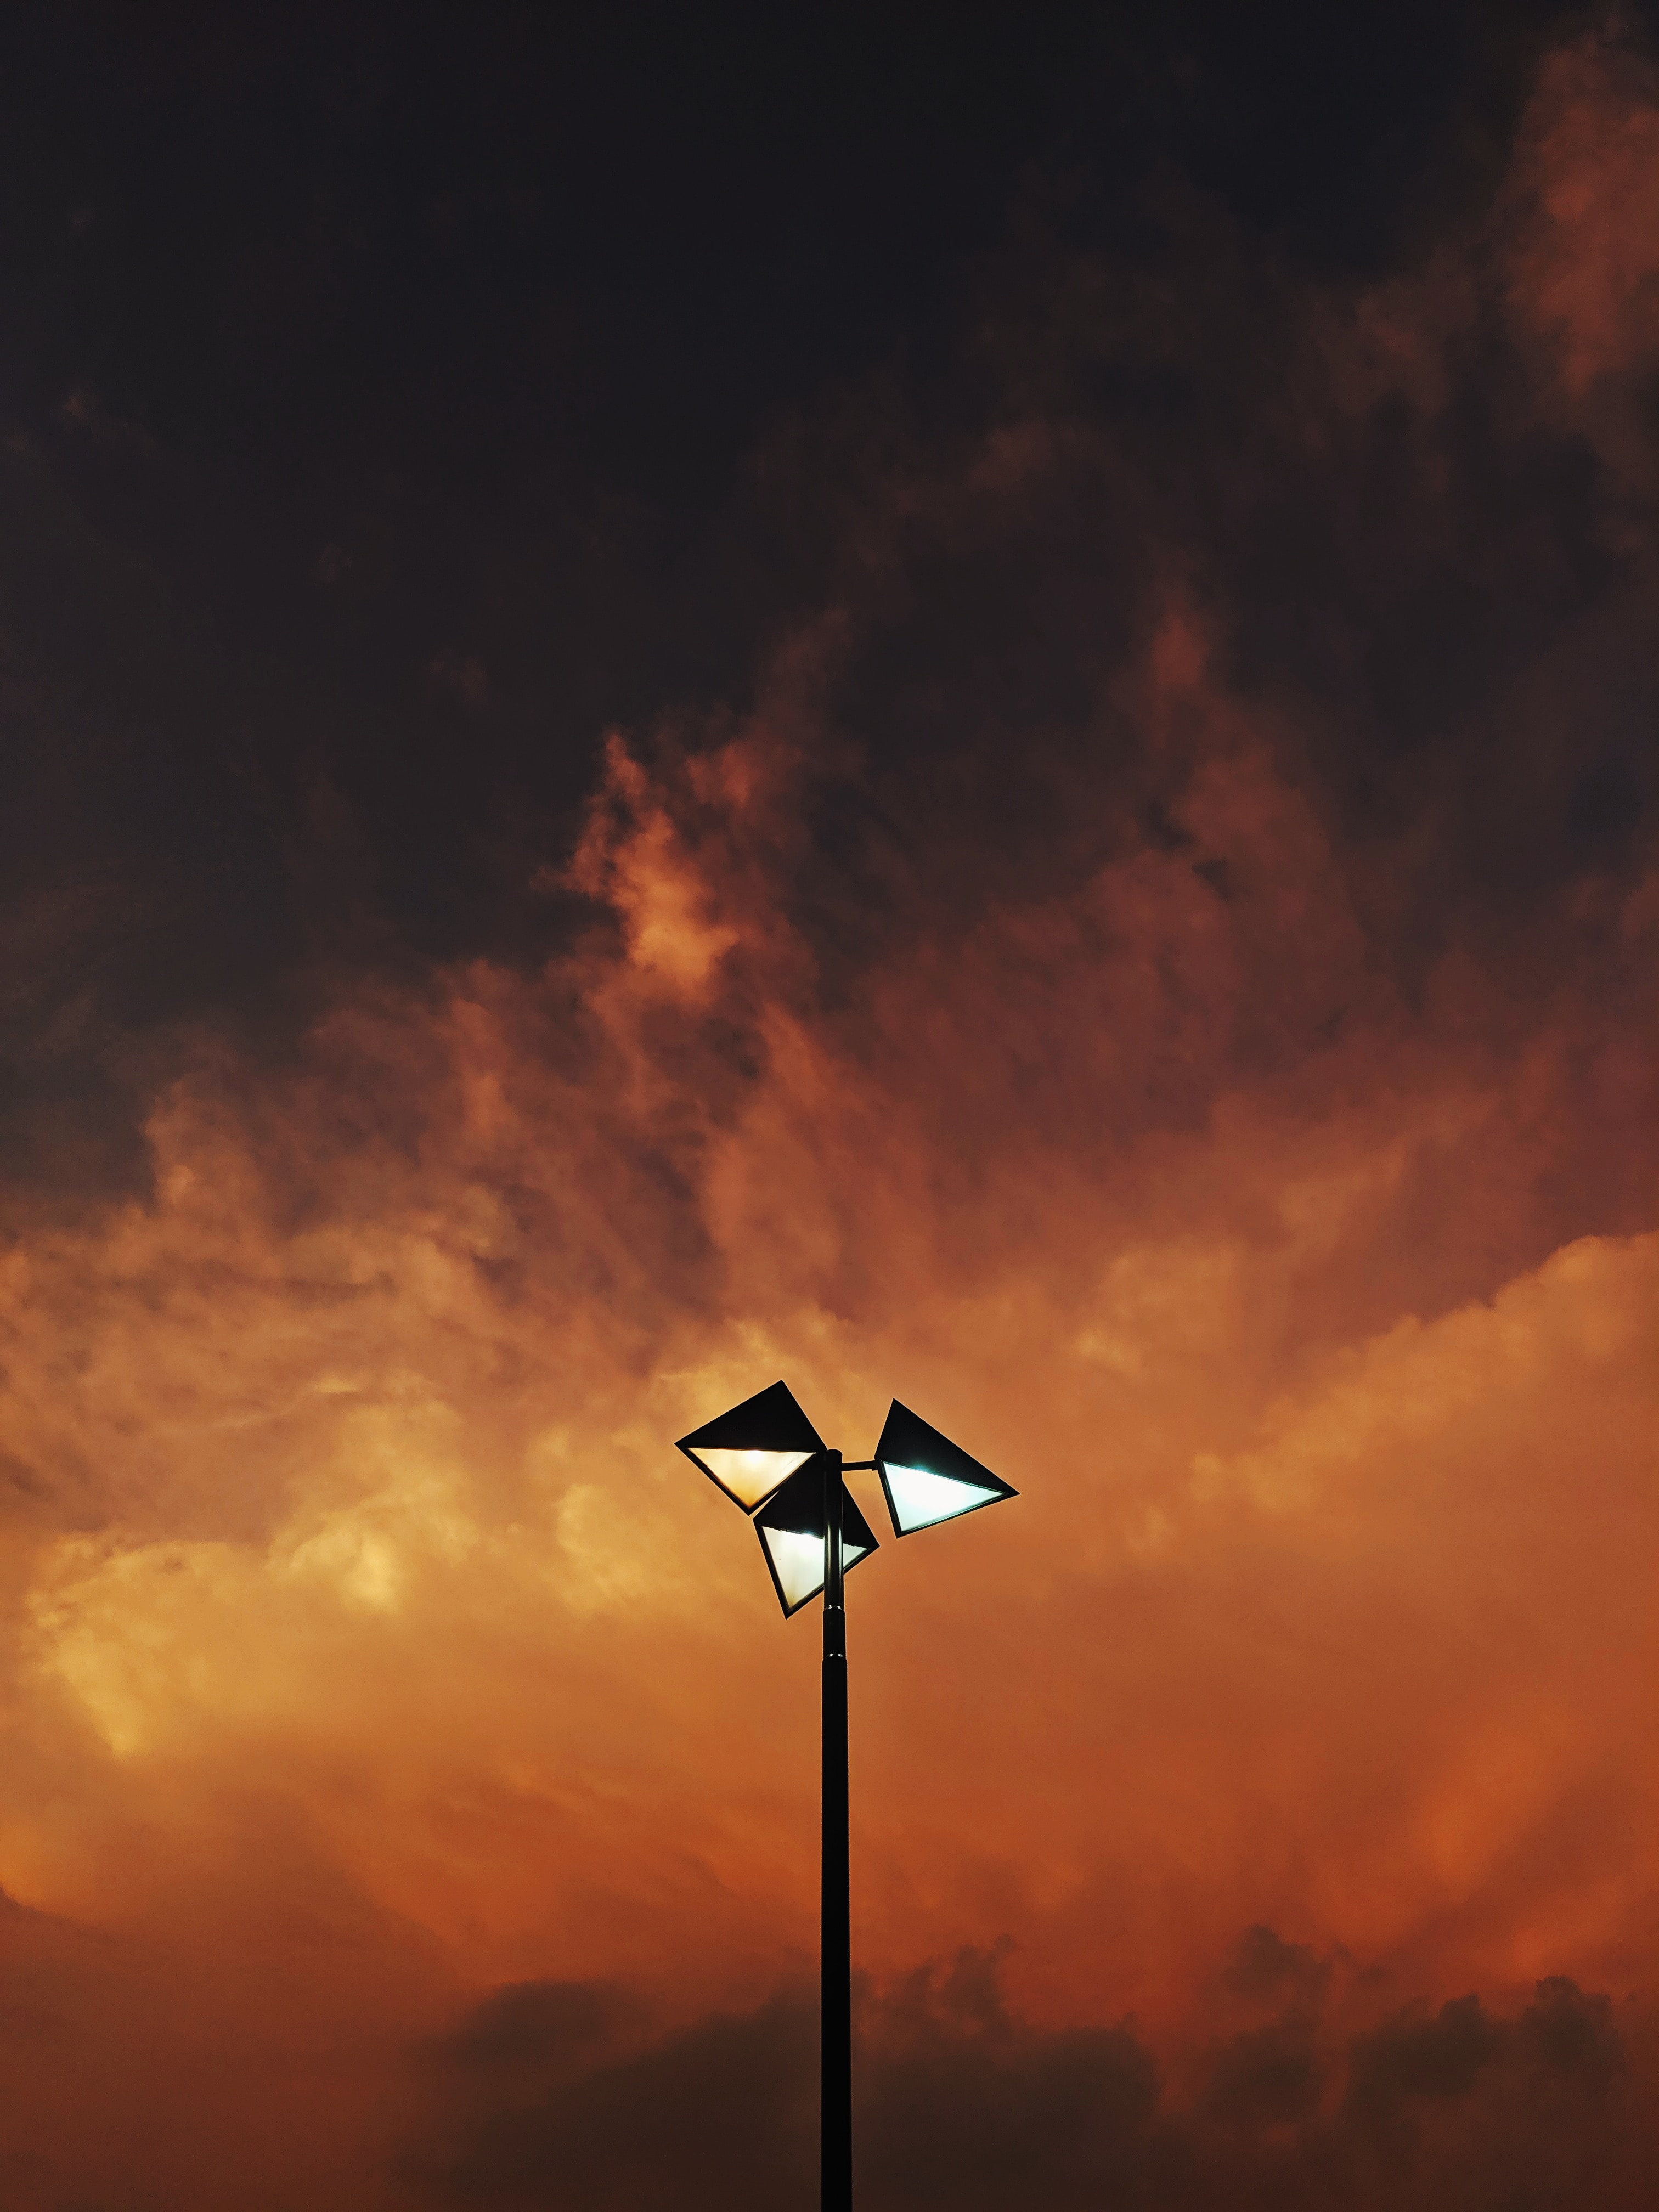 sky, twilight, clouds, lantern collection of HD images